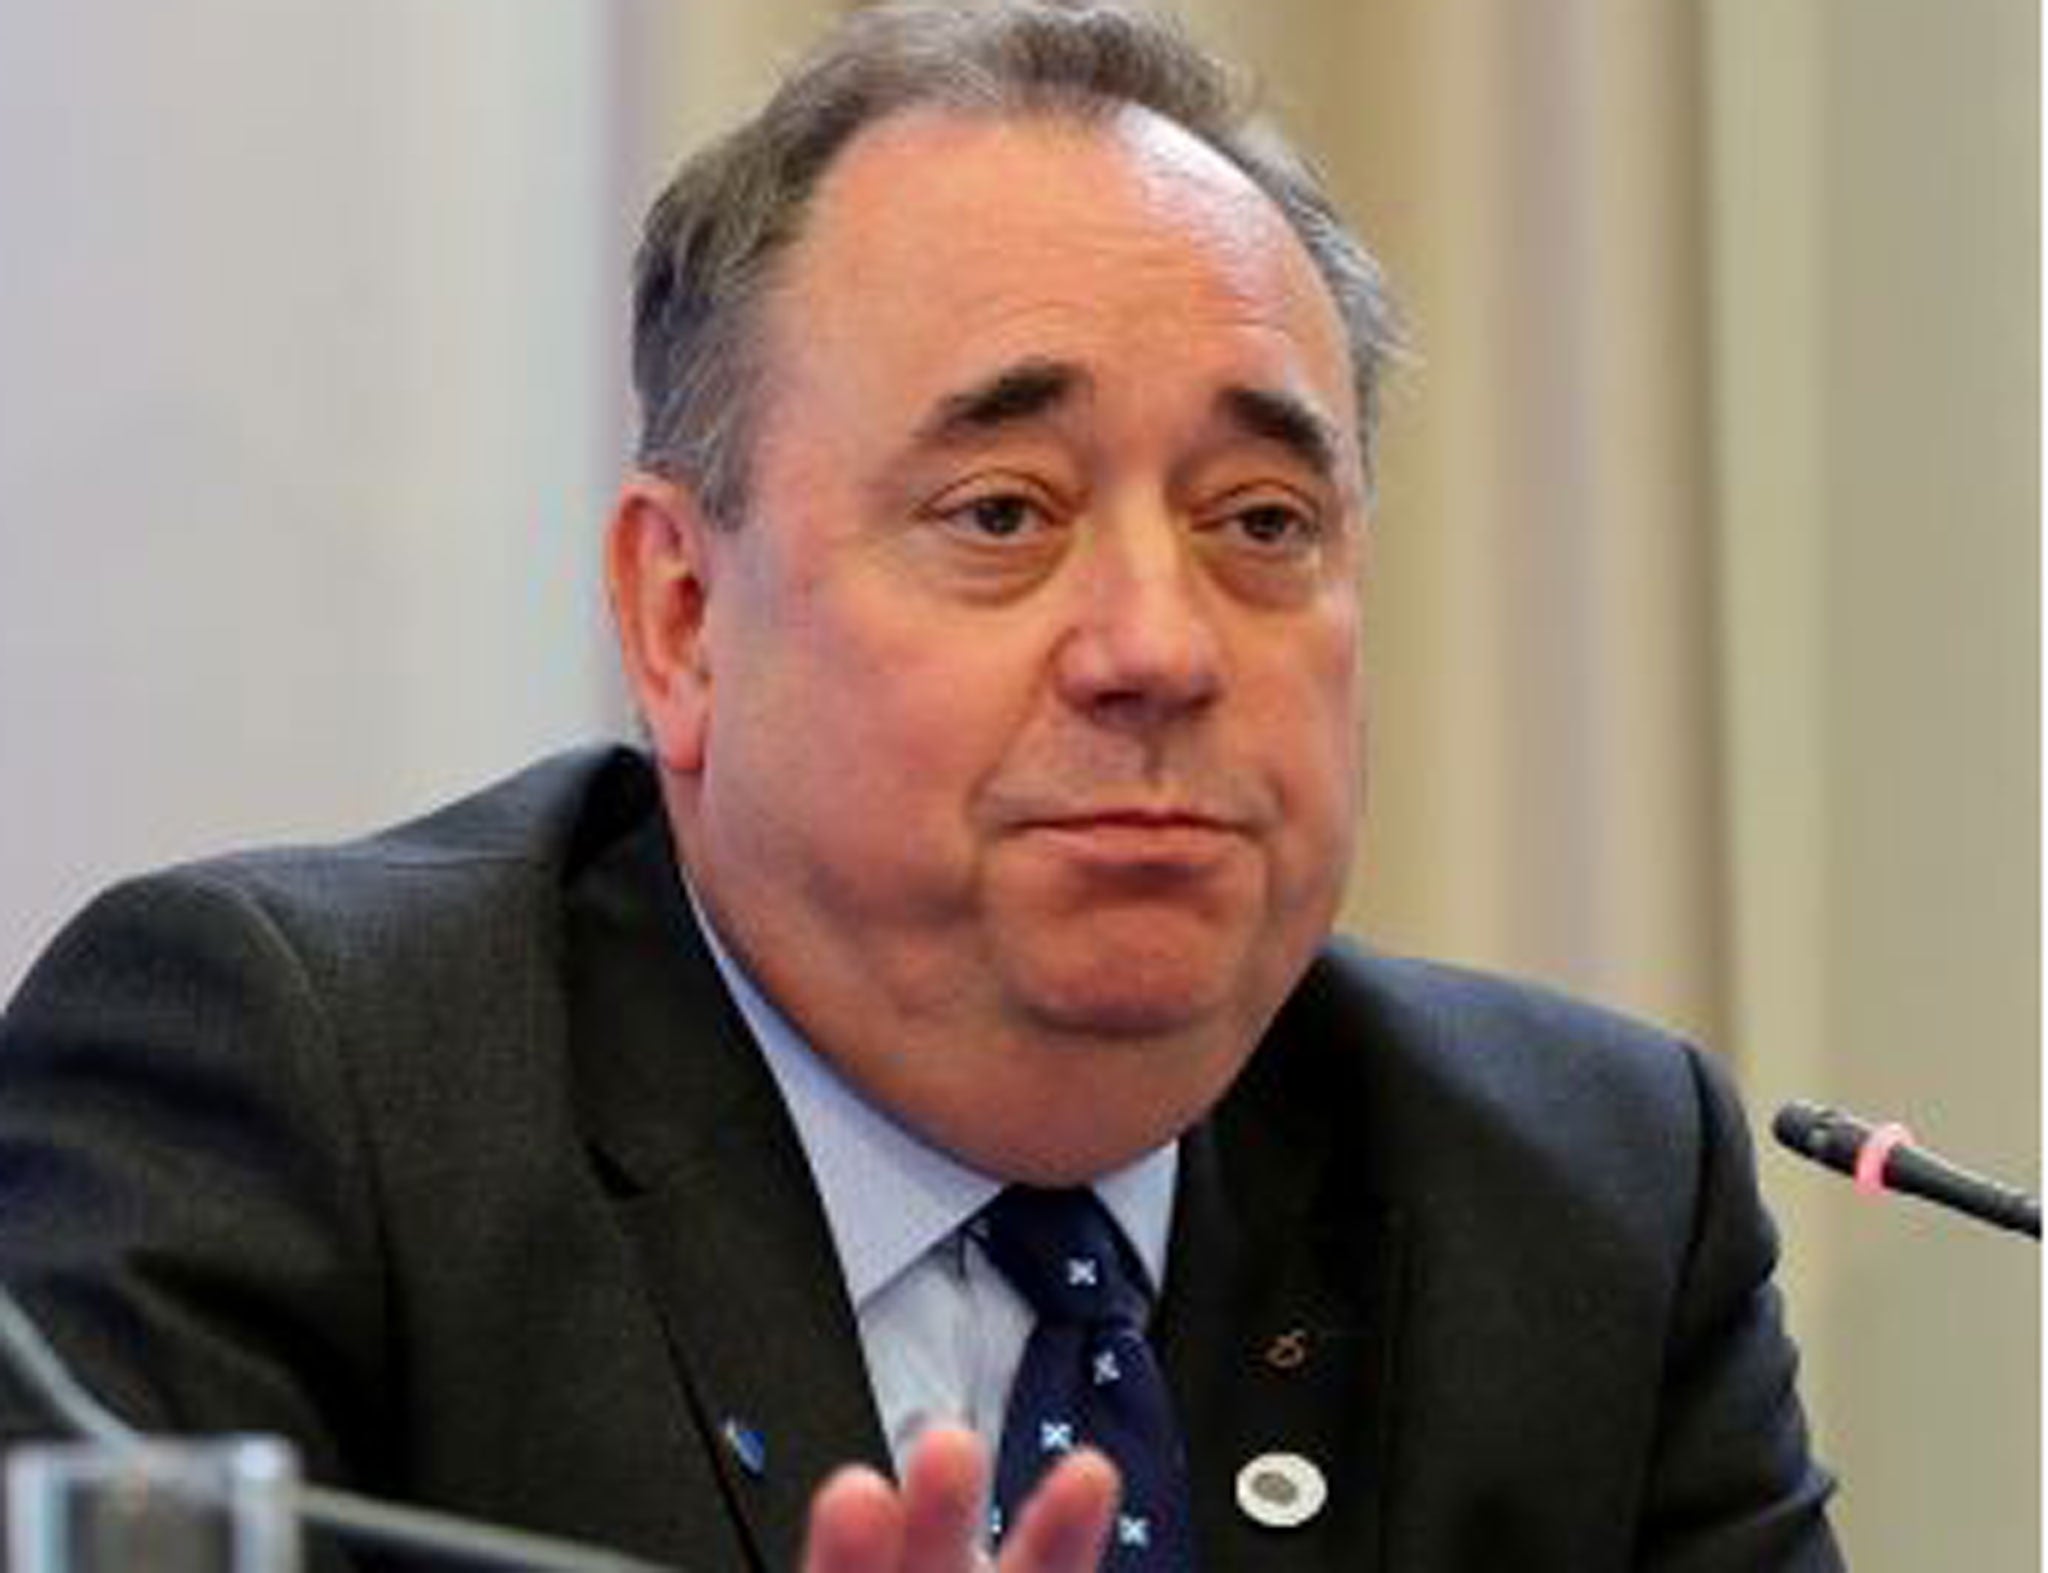 Alex Salmond also criticised the Royal and Ancient Golf Club of St Andrews for its male-only membership